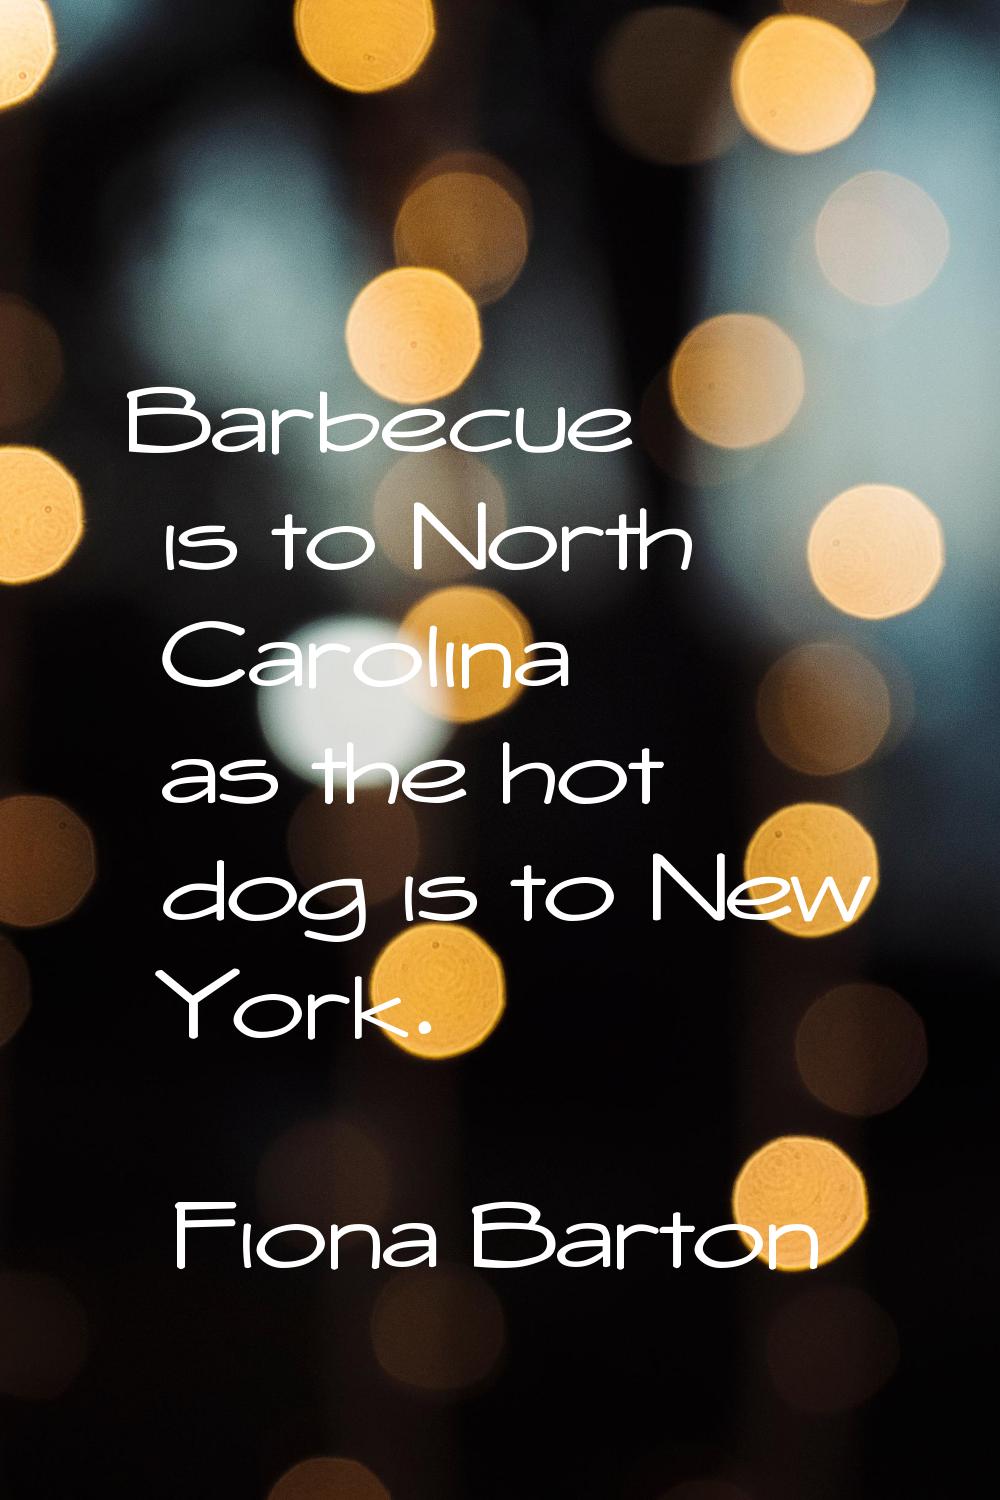 Barbecue is to North Carolina as the hot dog is to New York.